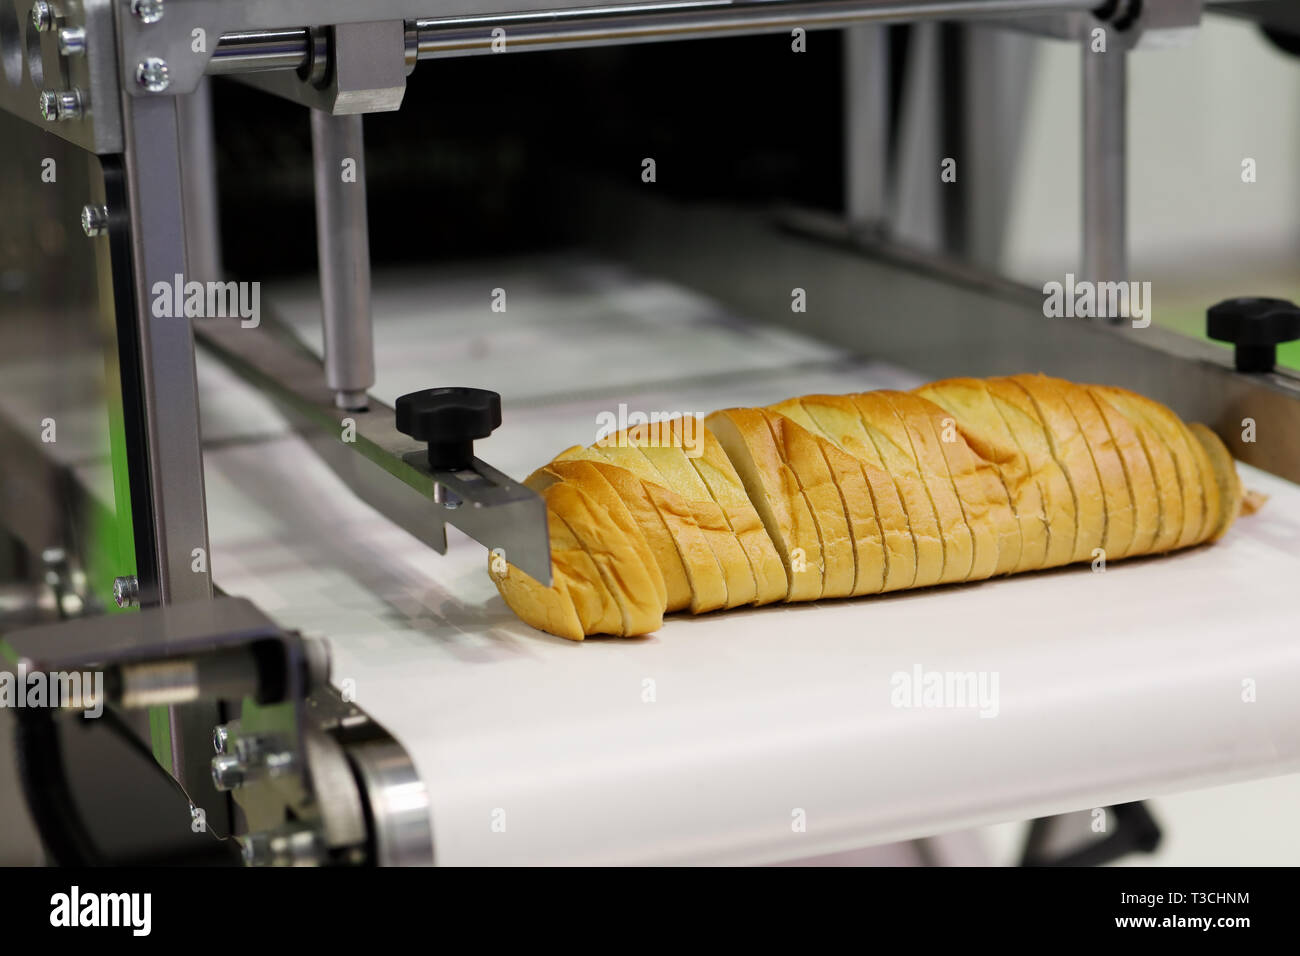 https://c8.alamy.com/comp/T3CHNM/industrial-automatic-bread-slicer-machine-for-bakeries-selective-focus-T3CHNM.jpg